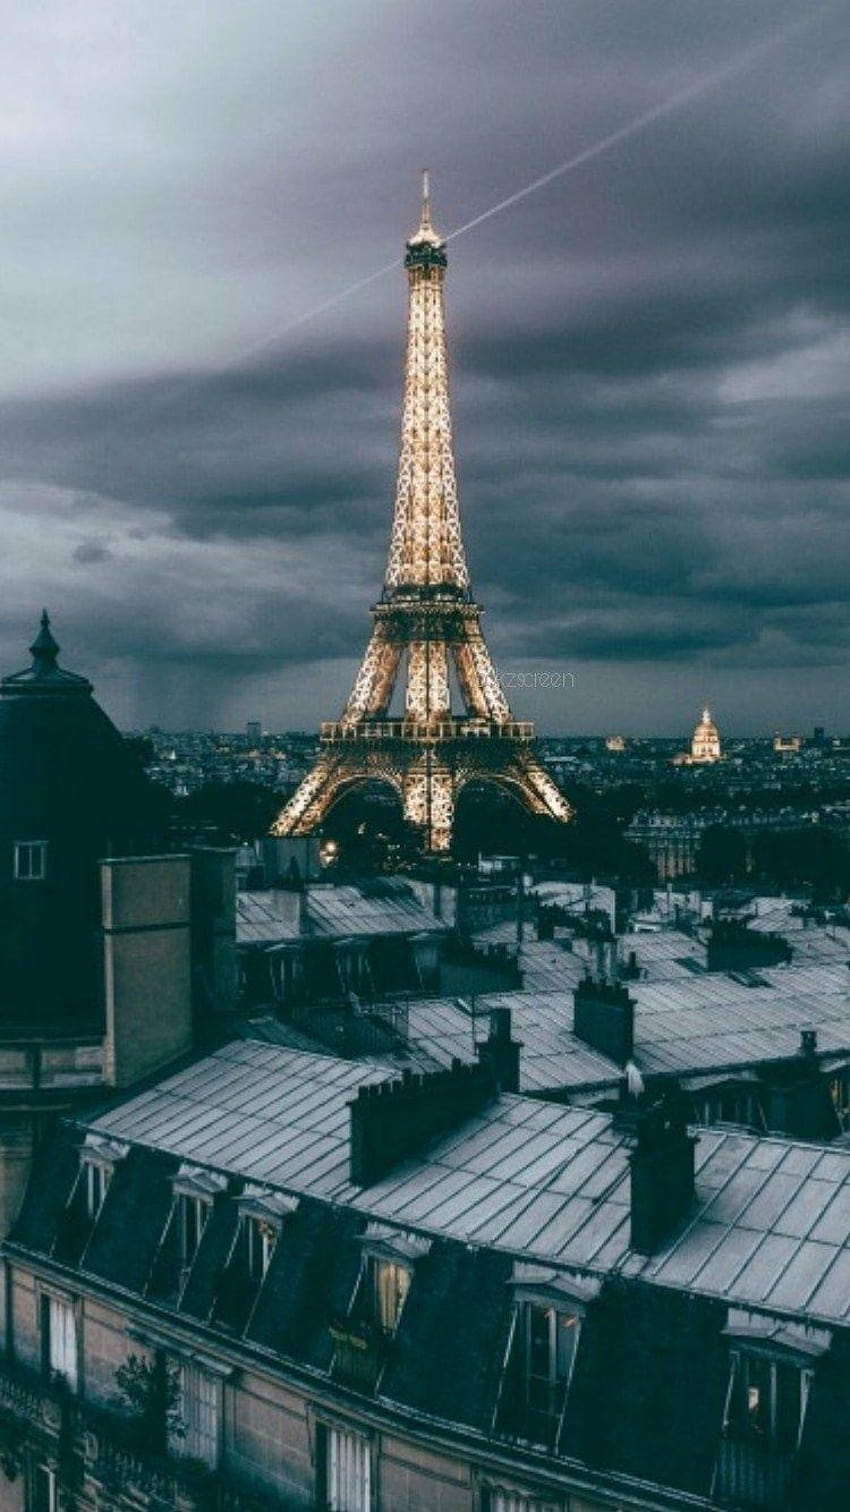 Eiffel Tower iPhone Wallpaper with high-resolution 1080x1920 pixel. You can use this wallpaper for your iPhone 5, 6, 7, 8, X, XS, XR backgrounds, Mobile Screensaver, or iPad Lock Screen - Eiffel Tower, Paris